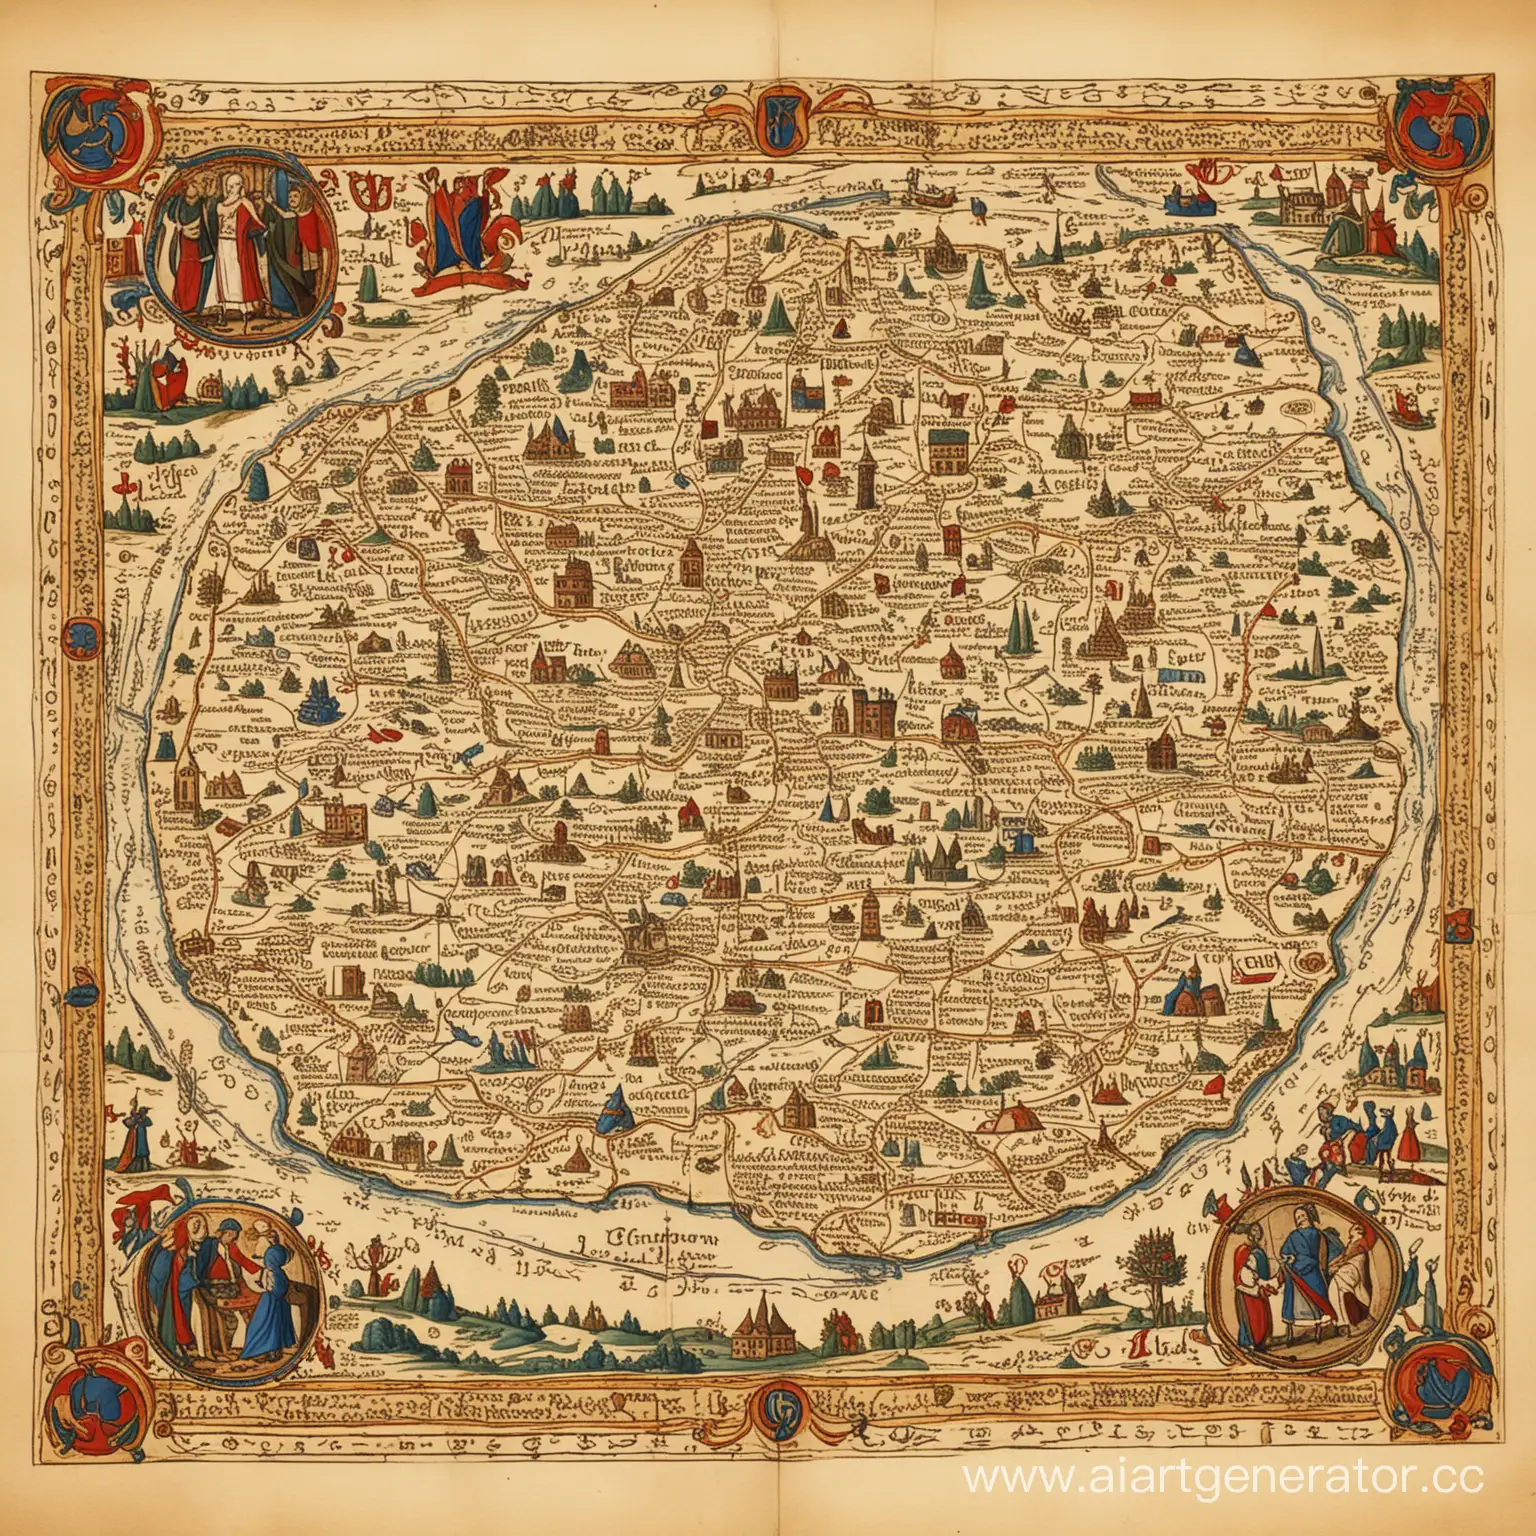 Medieval-Map-Illustrating-the-Landscape-of-the-Country